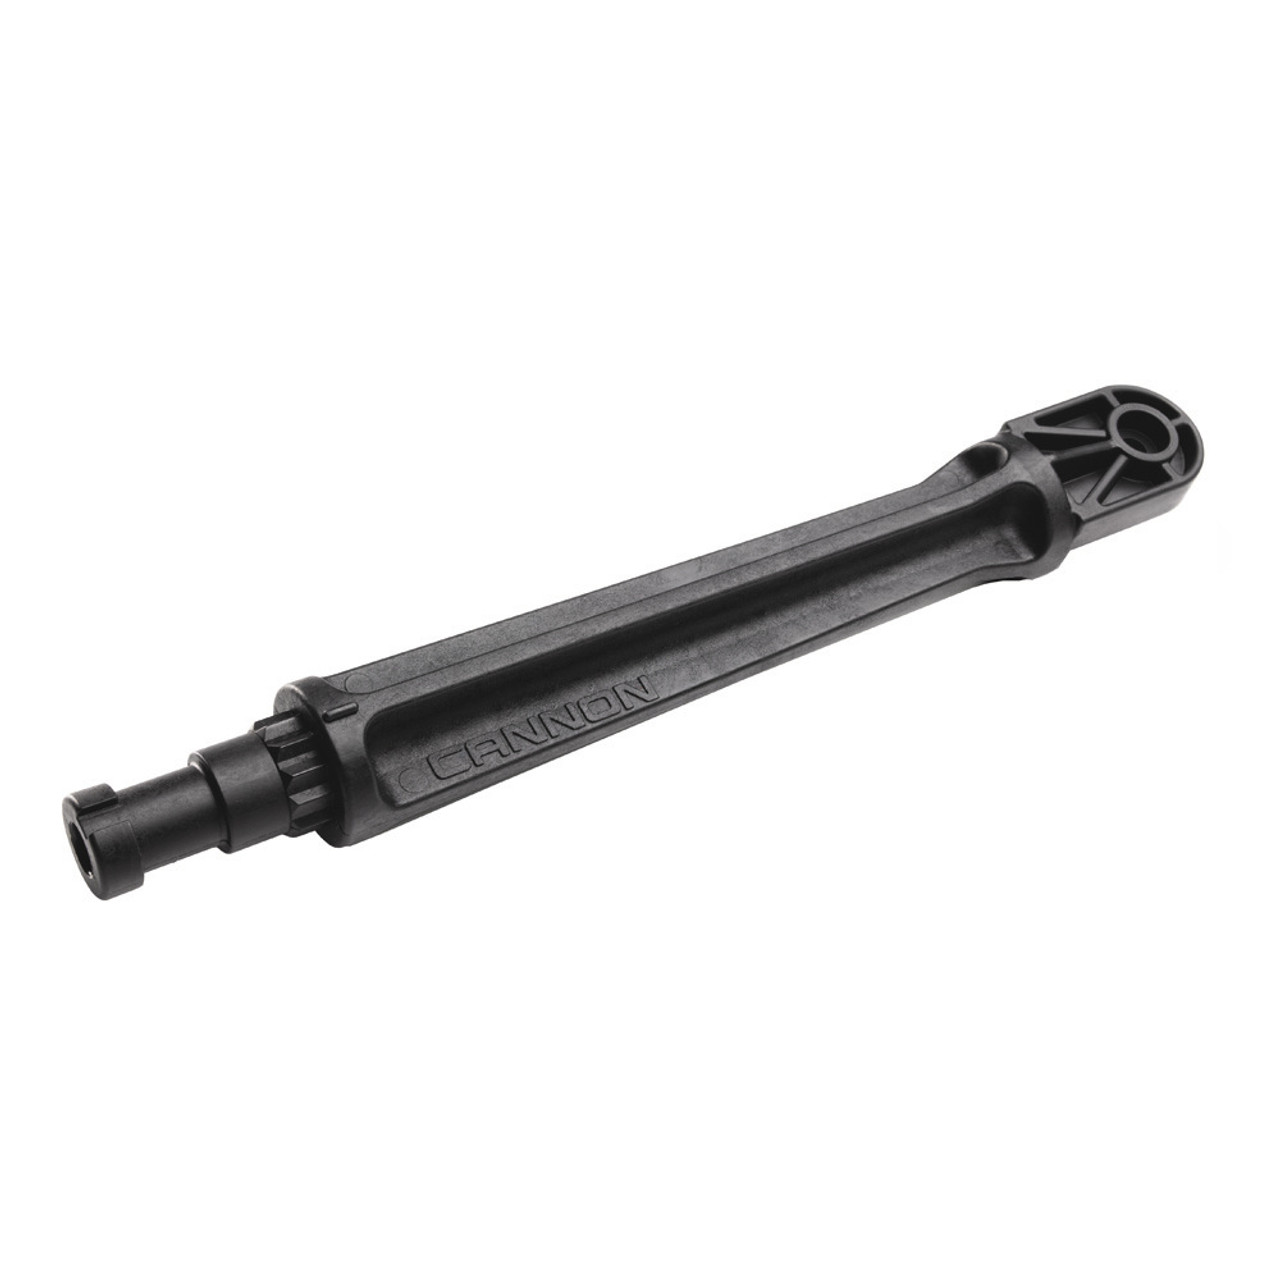 Cannon Extension Post for Rod Holders - FISH307.com